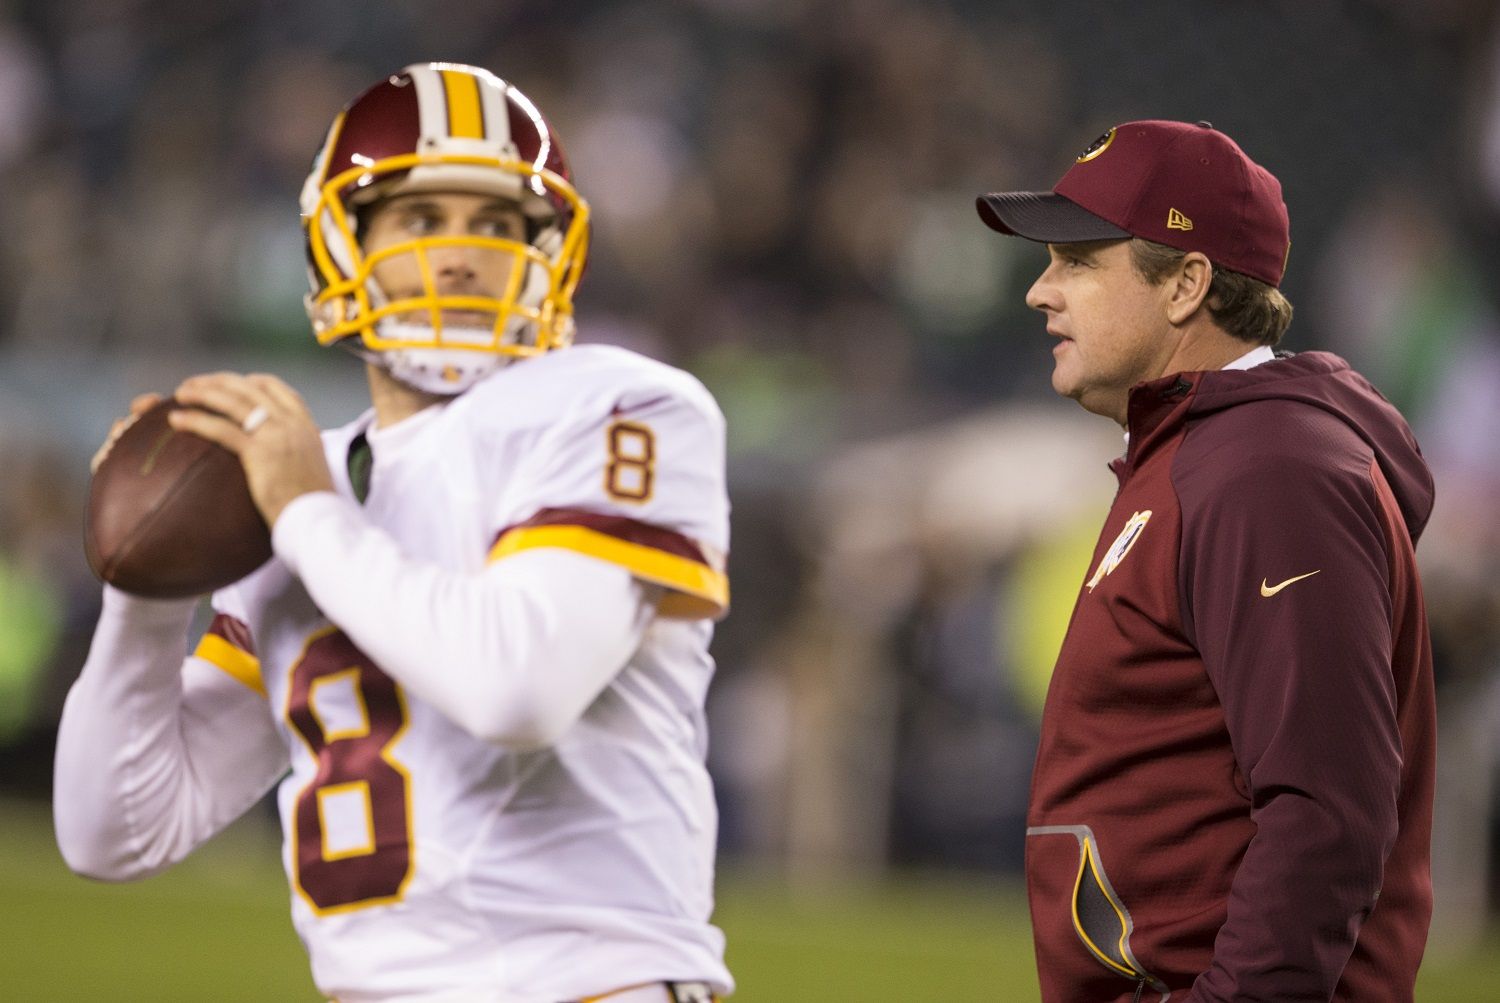 PHILADELPHIA, PA - DECEMBER 26: Kirk Cousins #8 of the Washington Redskins warms up as head coach Jay Gruden walks past him prior to the game against the Philadelphia Eagles on December 26, 2015 at Lincoln Financial Field in Philadelphia, Pennsylvania.  (Photo by Mitchell Leff/Getty Images)